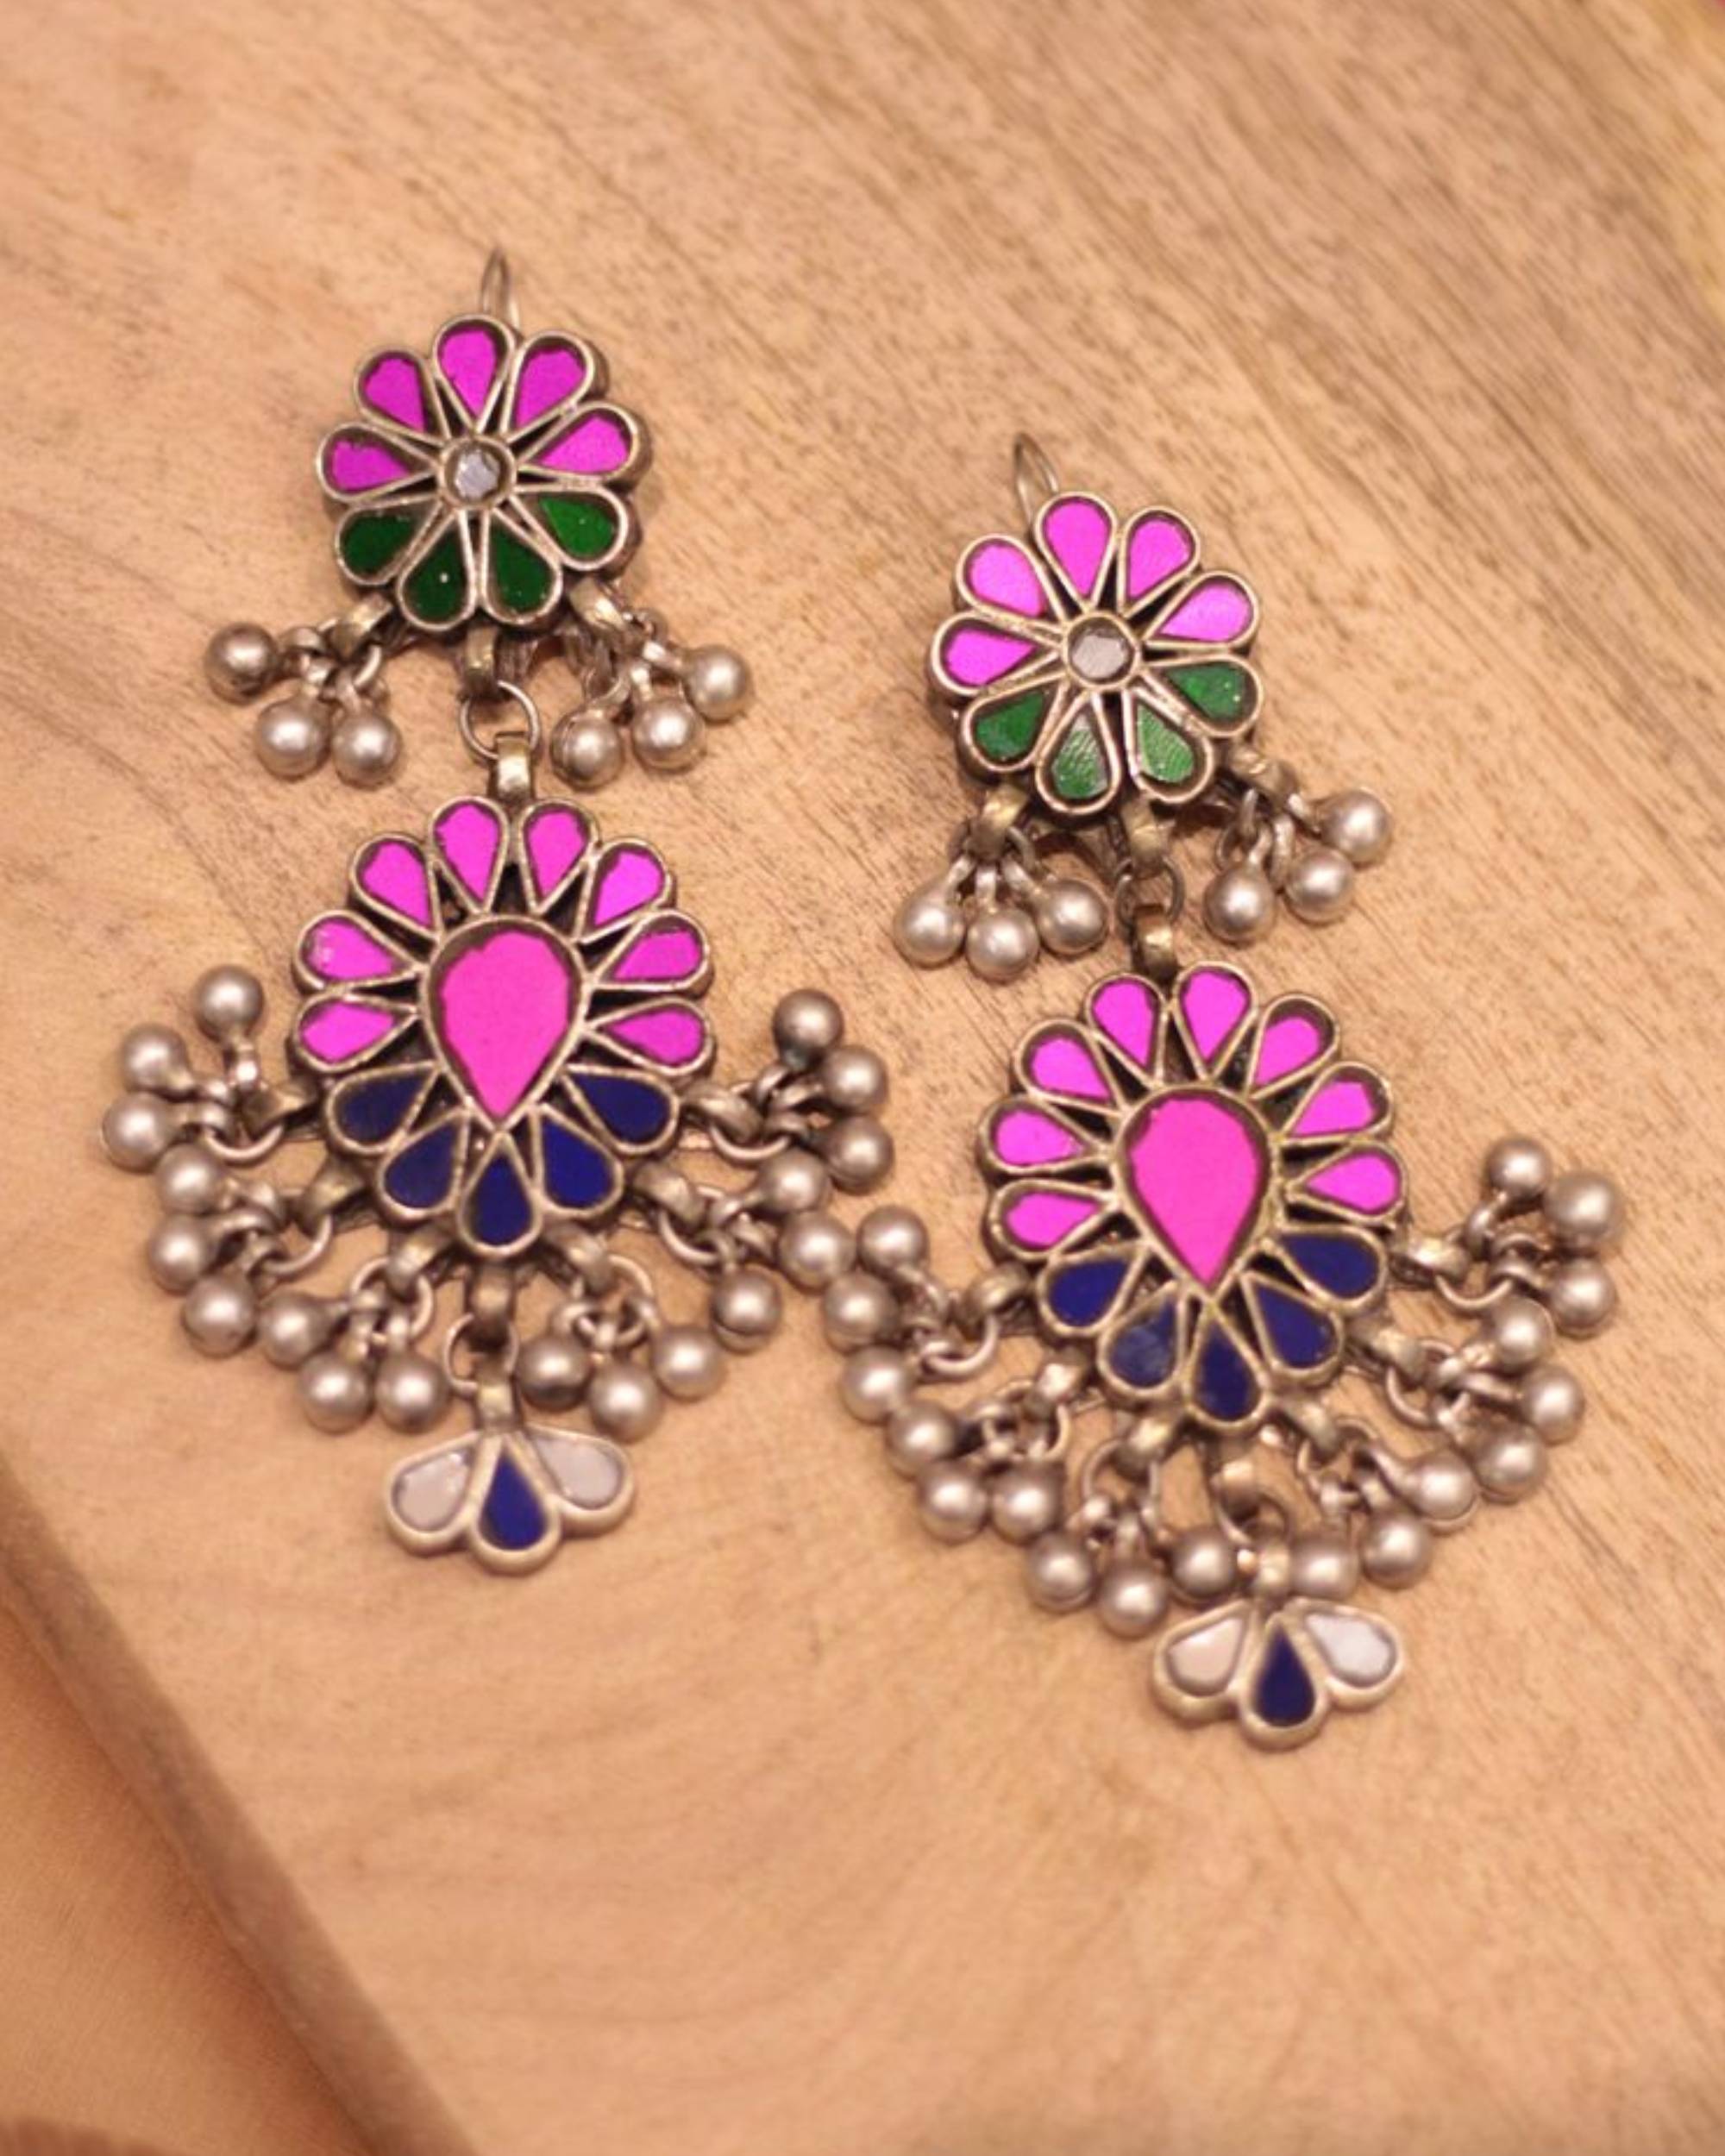 Pink and green florlal earrings